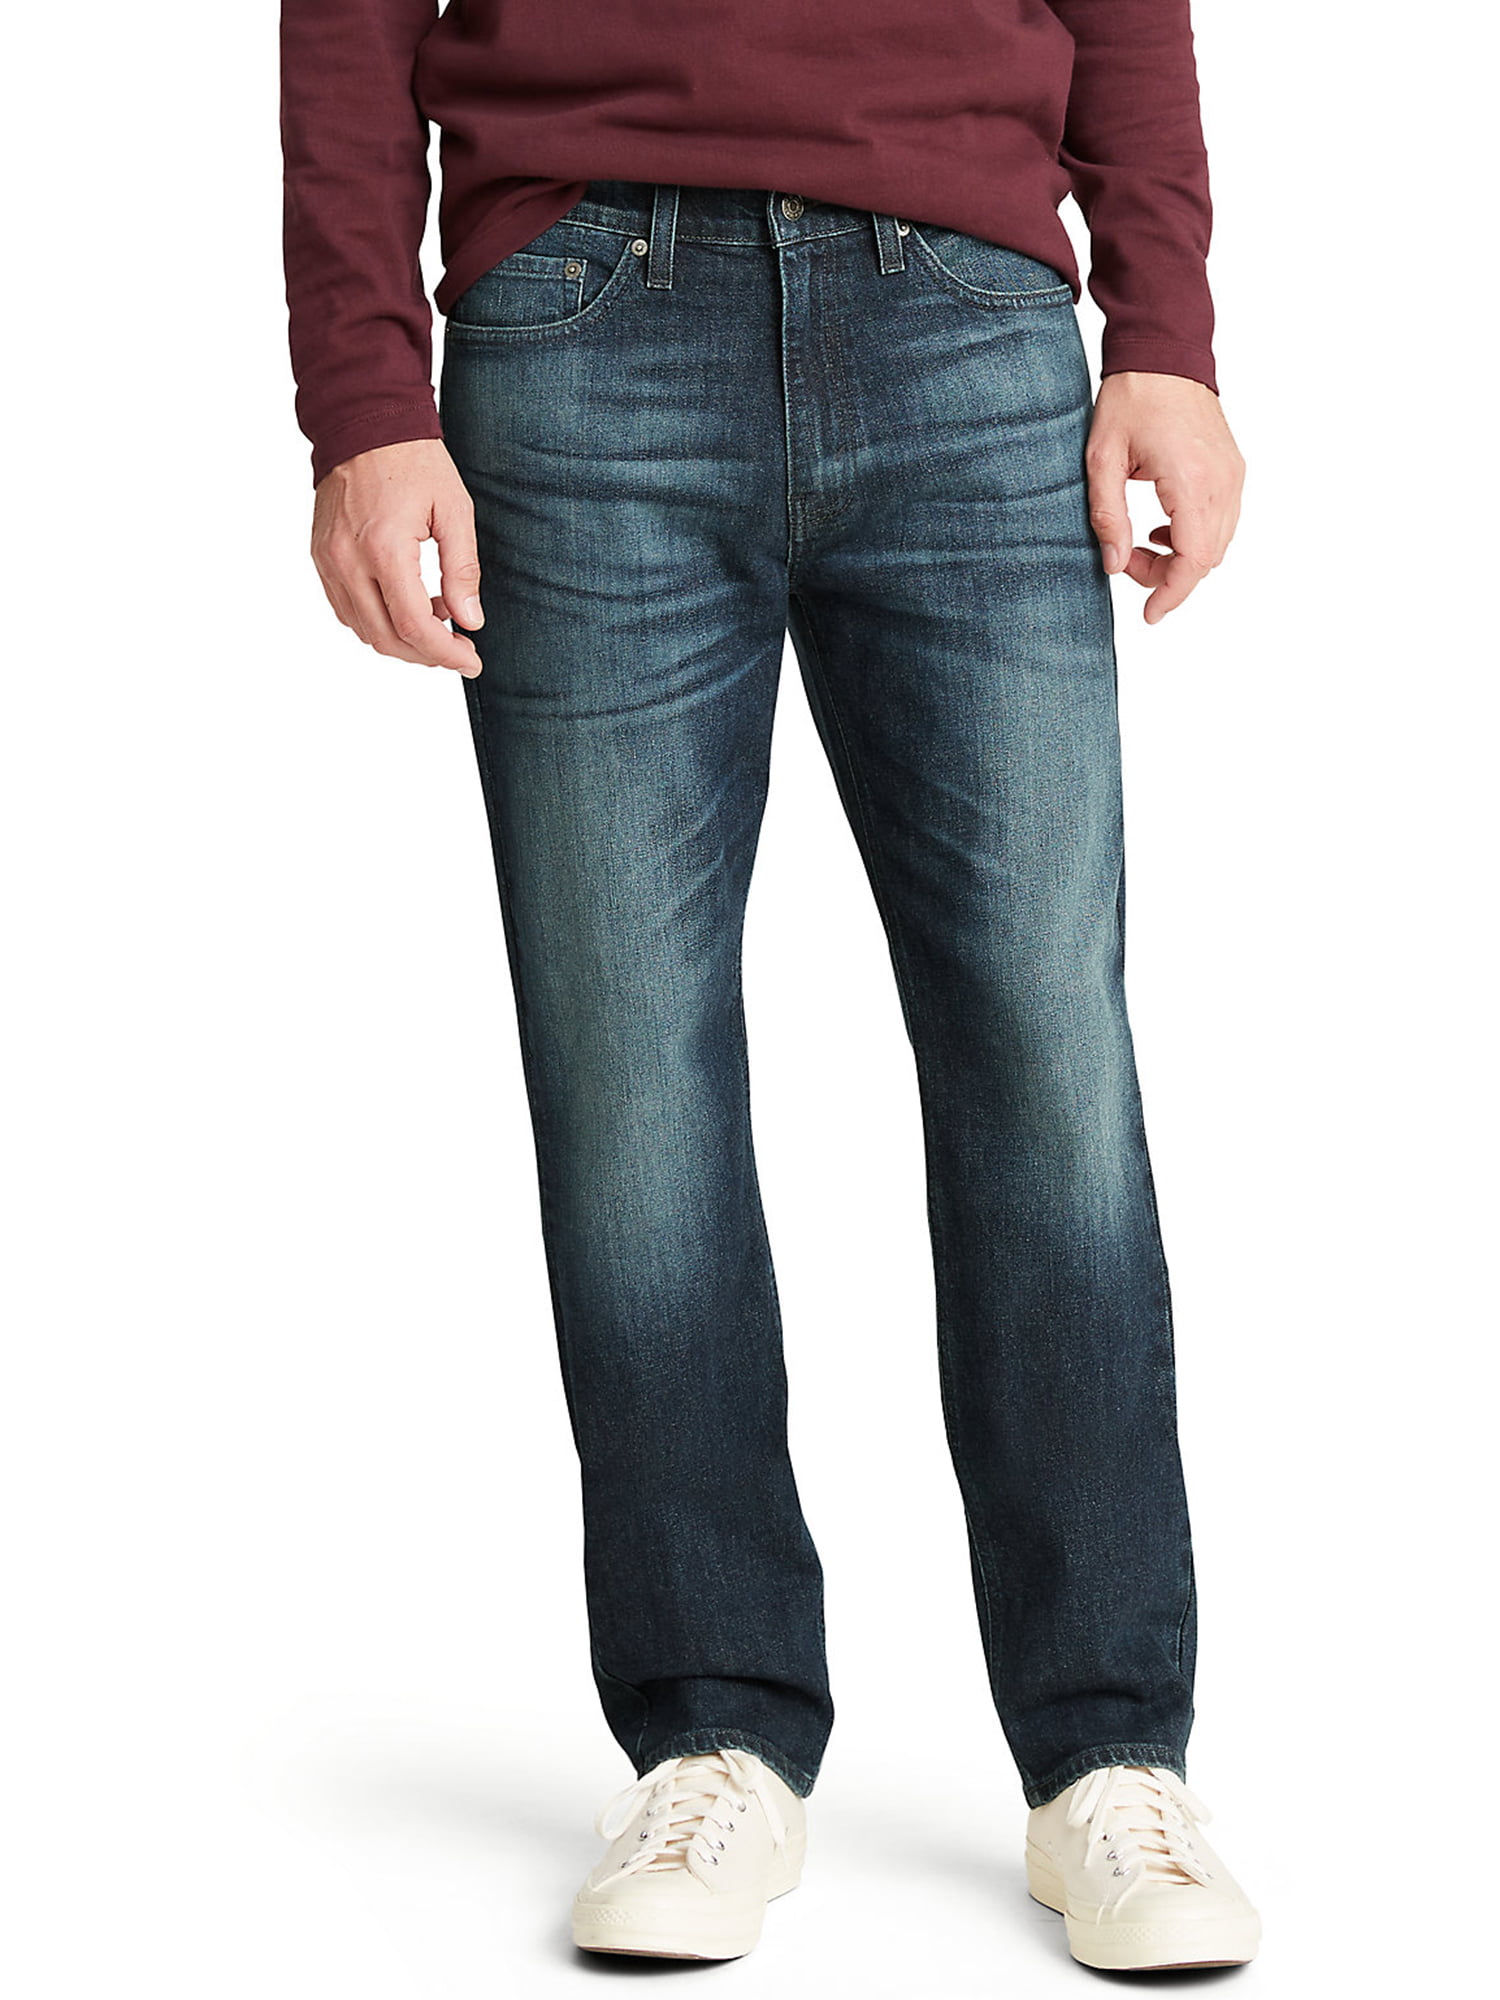 Signature by Levi Strauss & Co. - Signature by Levi Strauss & Co. Men's